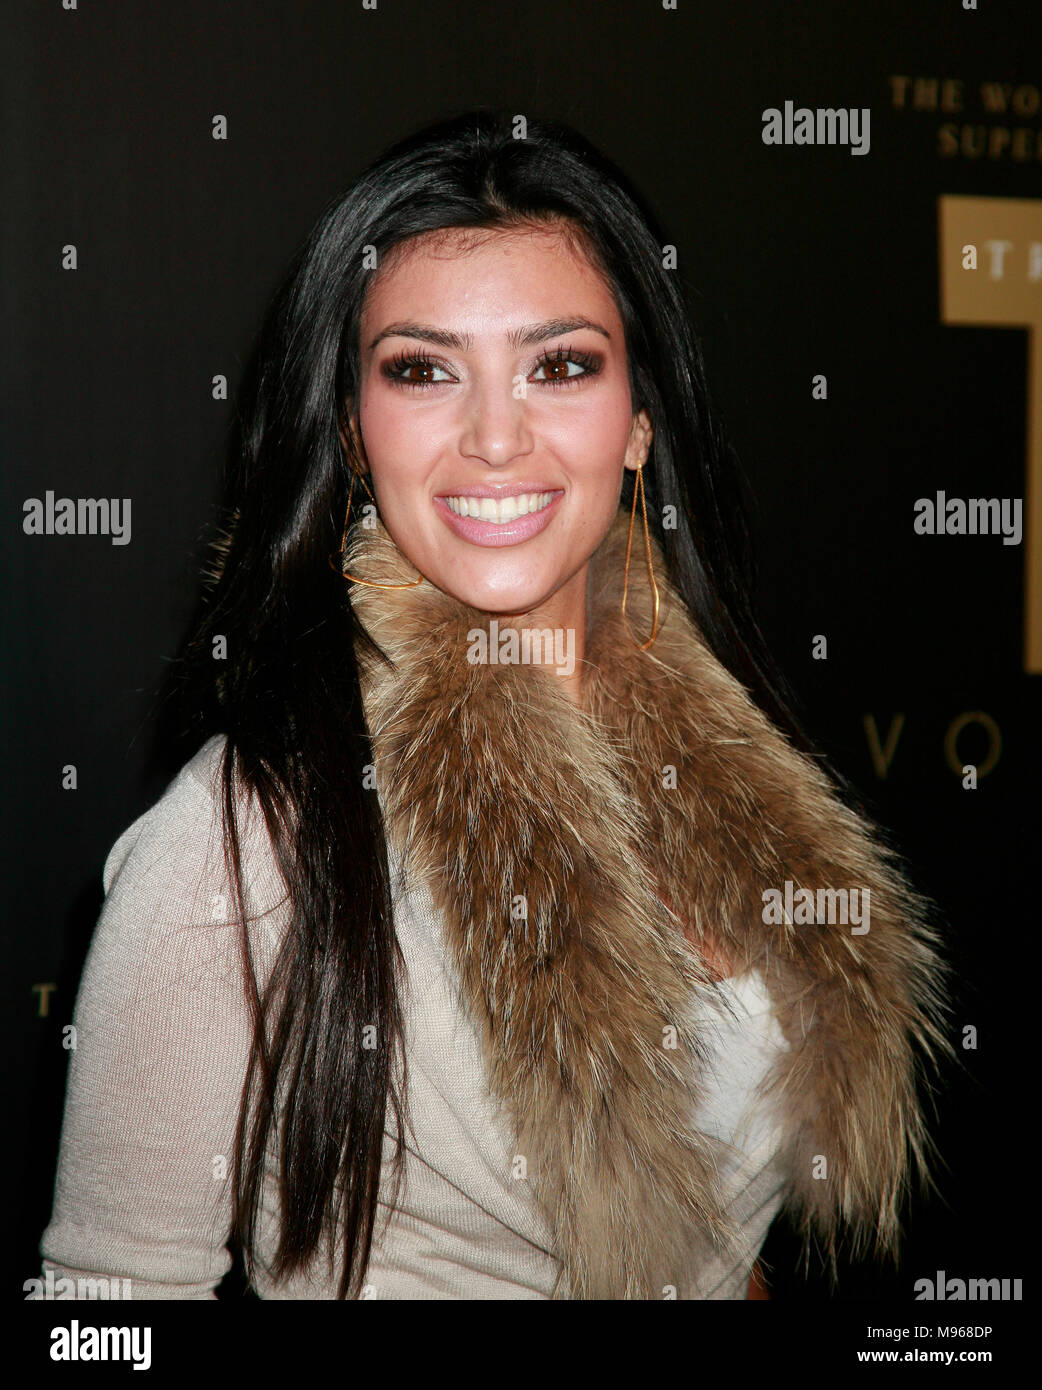 Kim Kardashian Arrives At The Trump Vodka Party At Les Deux Night Club In Hollywood Ca On January 17 07 Photo Credit Francis Specker Stock Photo Alamy